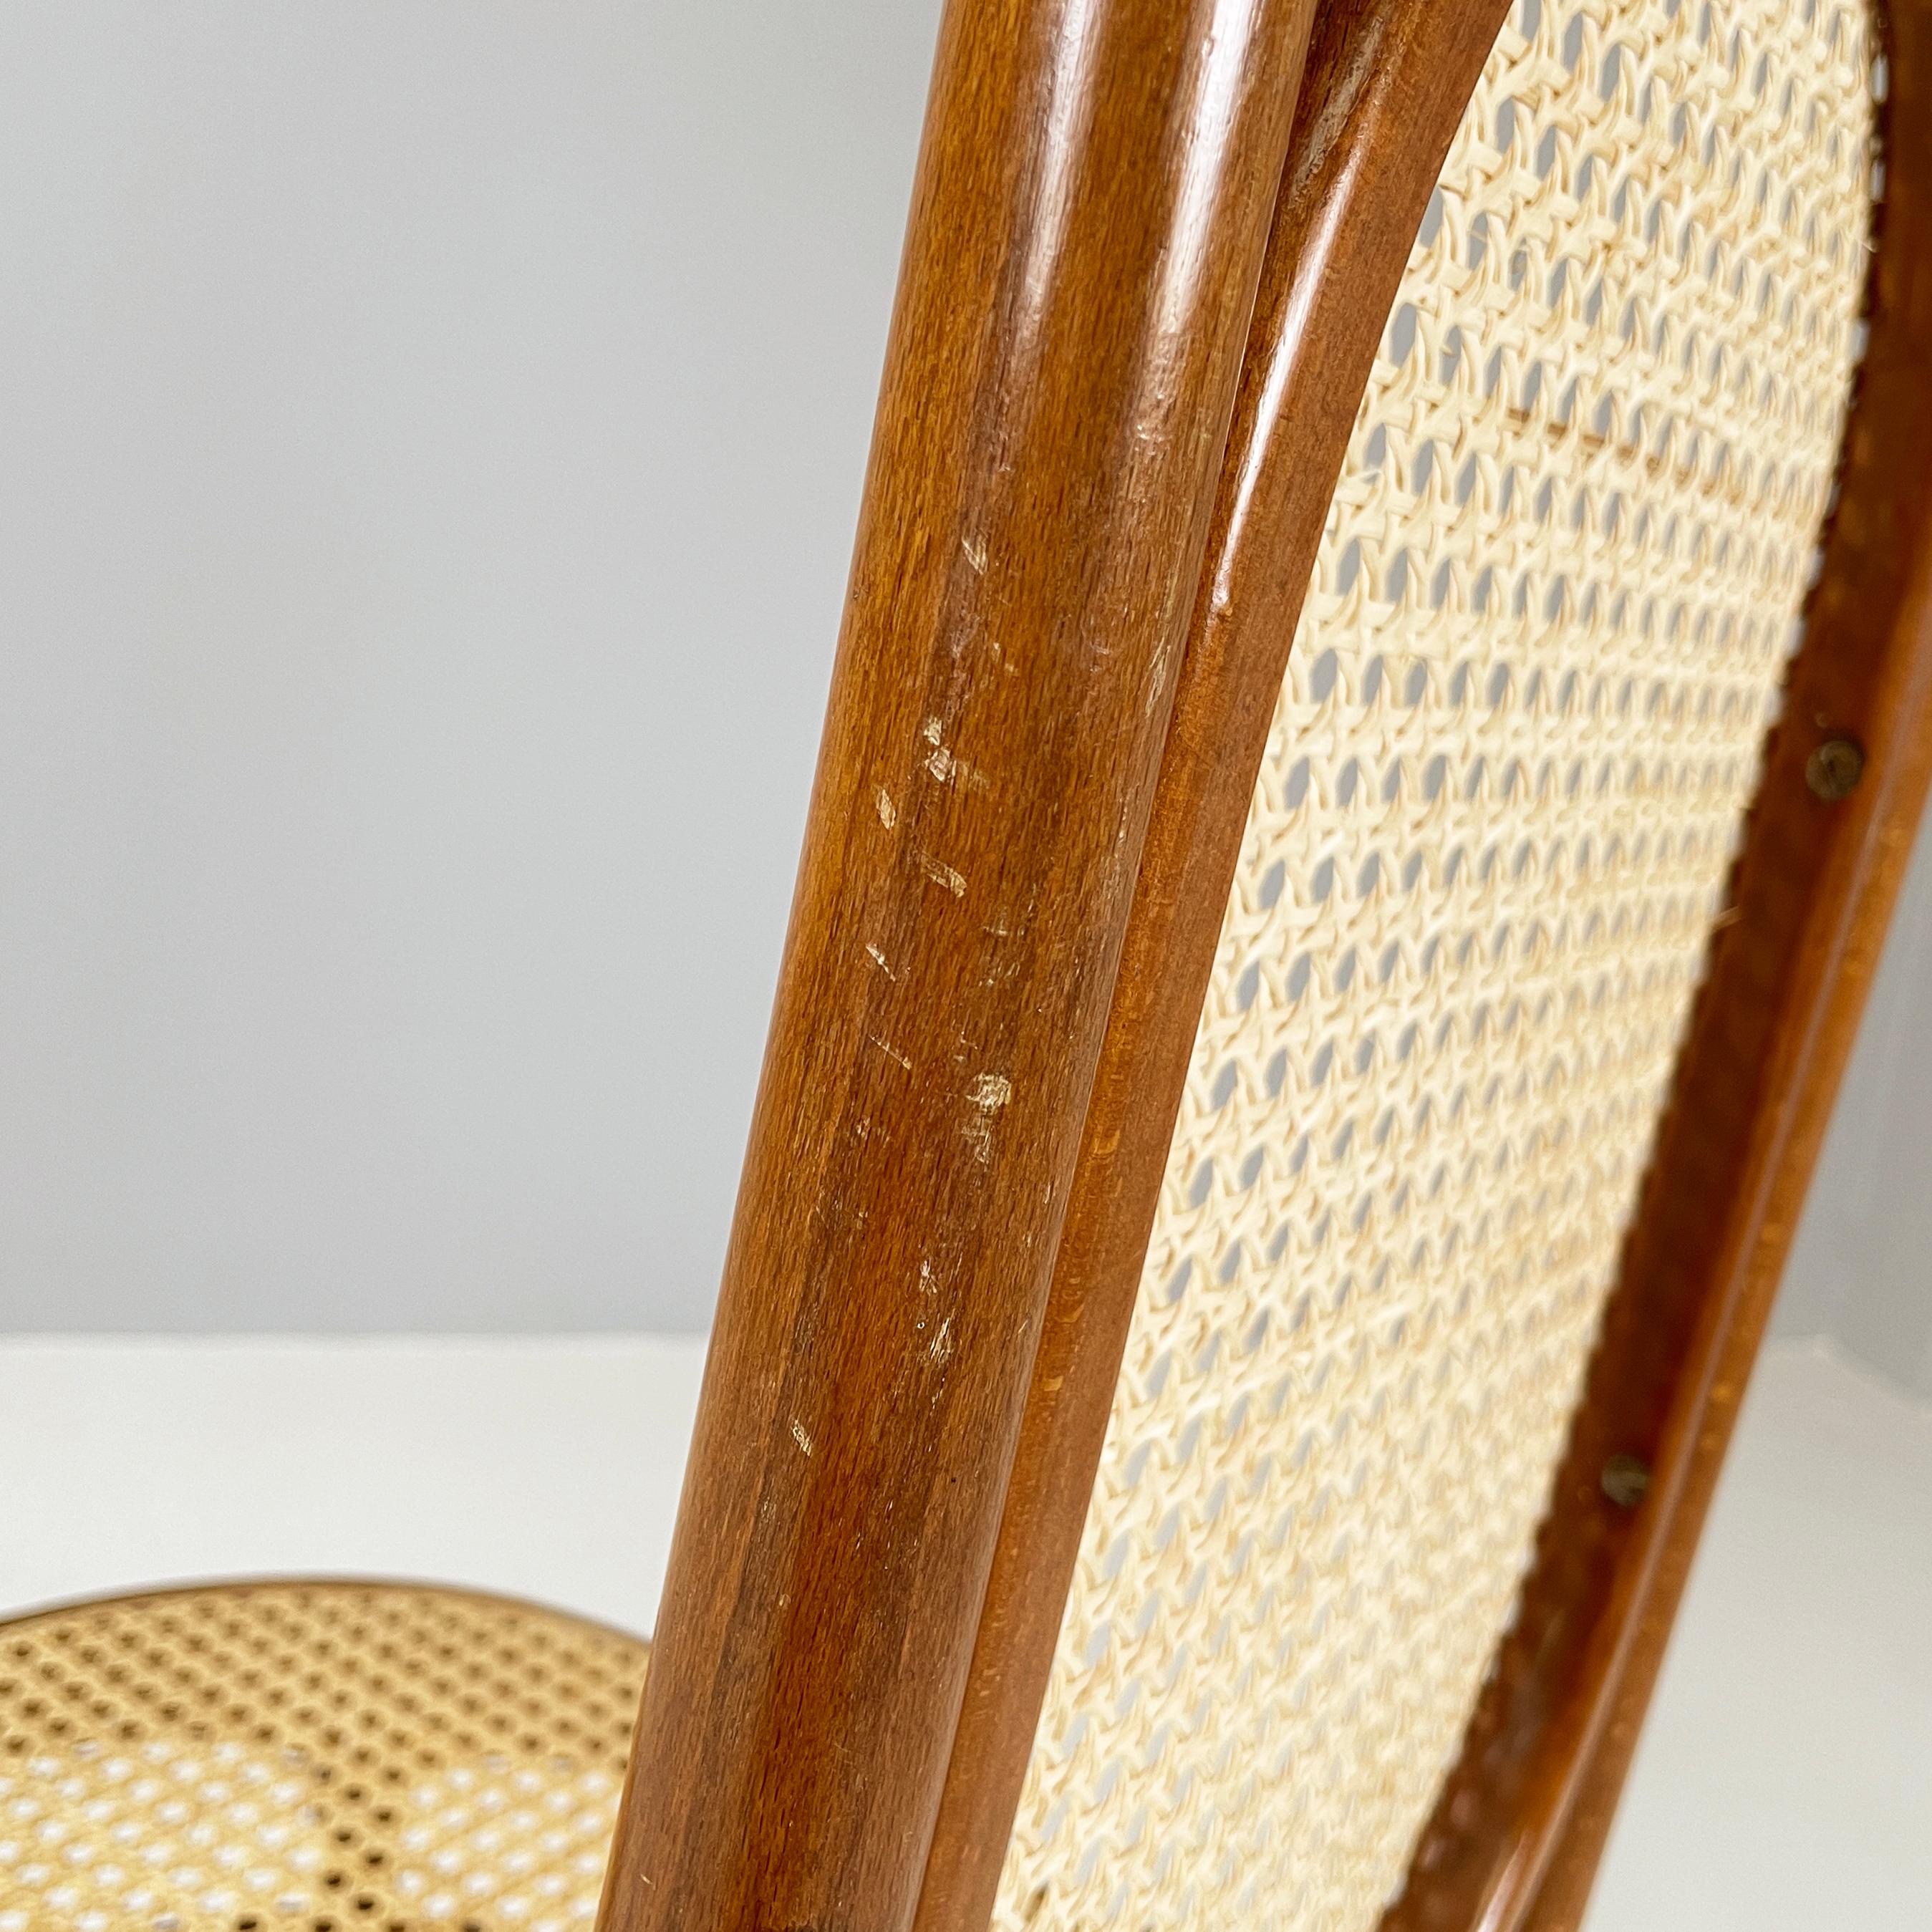 Italian Chair in straw and wood, 1900-1950s For Sale 9